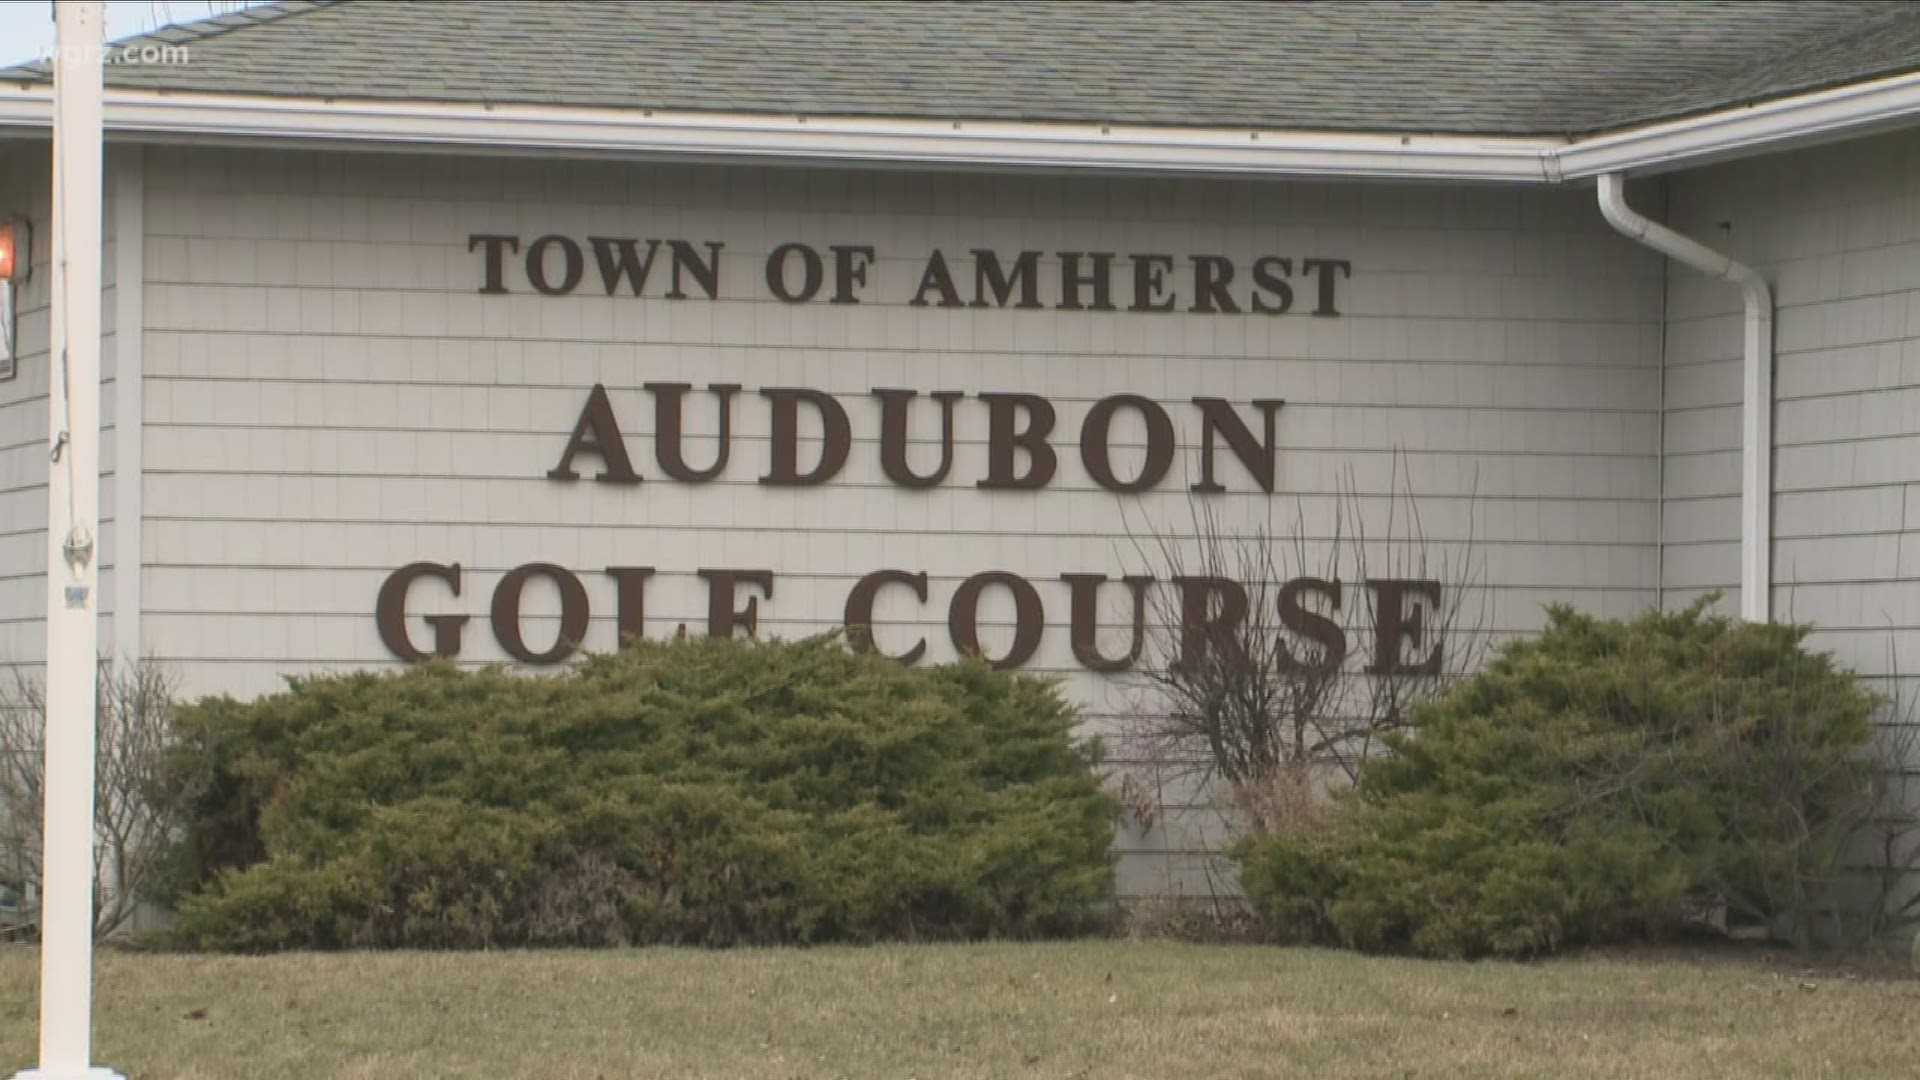 The idea came out two weeks ago to sell a portion of the golf course to Forest Lawn Group, but golfers are concerned about what that would mean for the golf course.